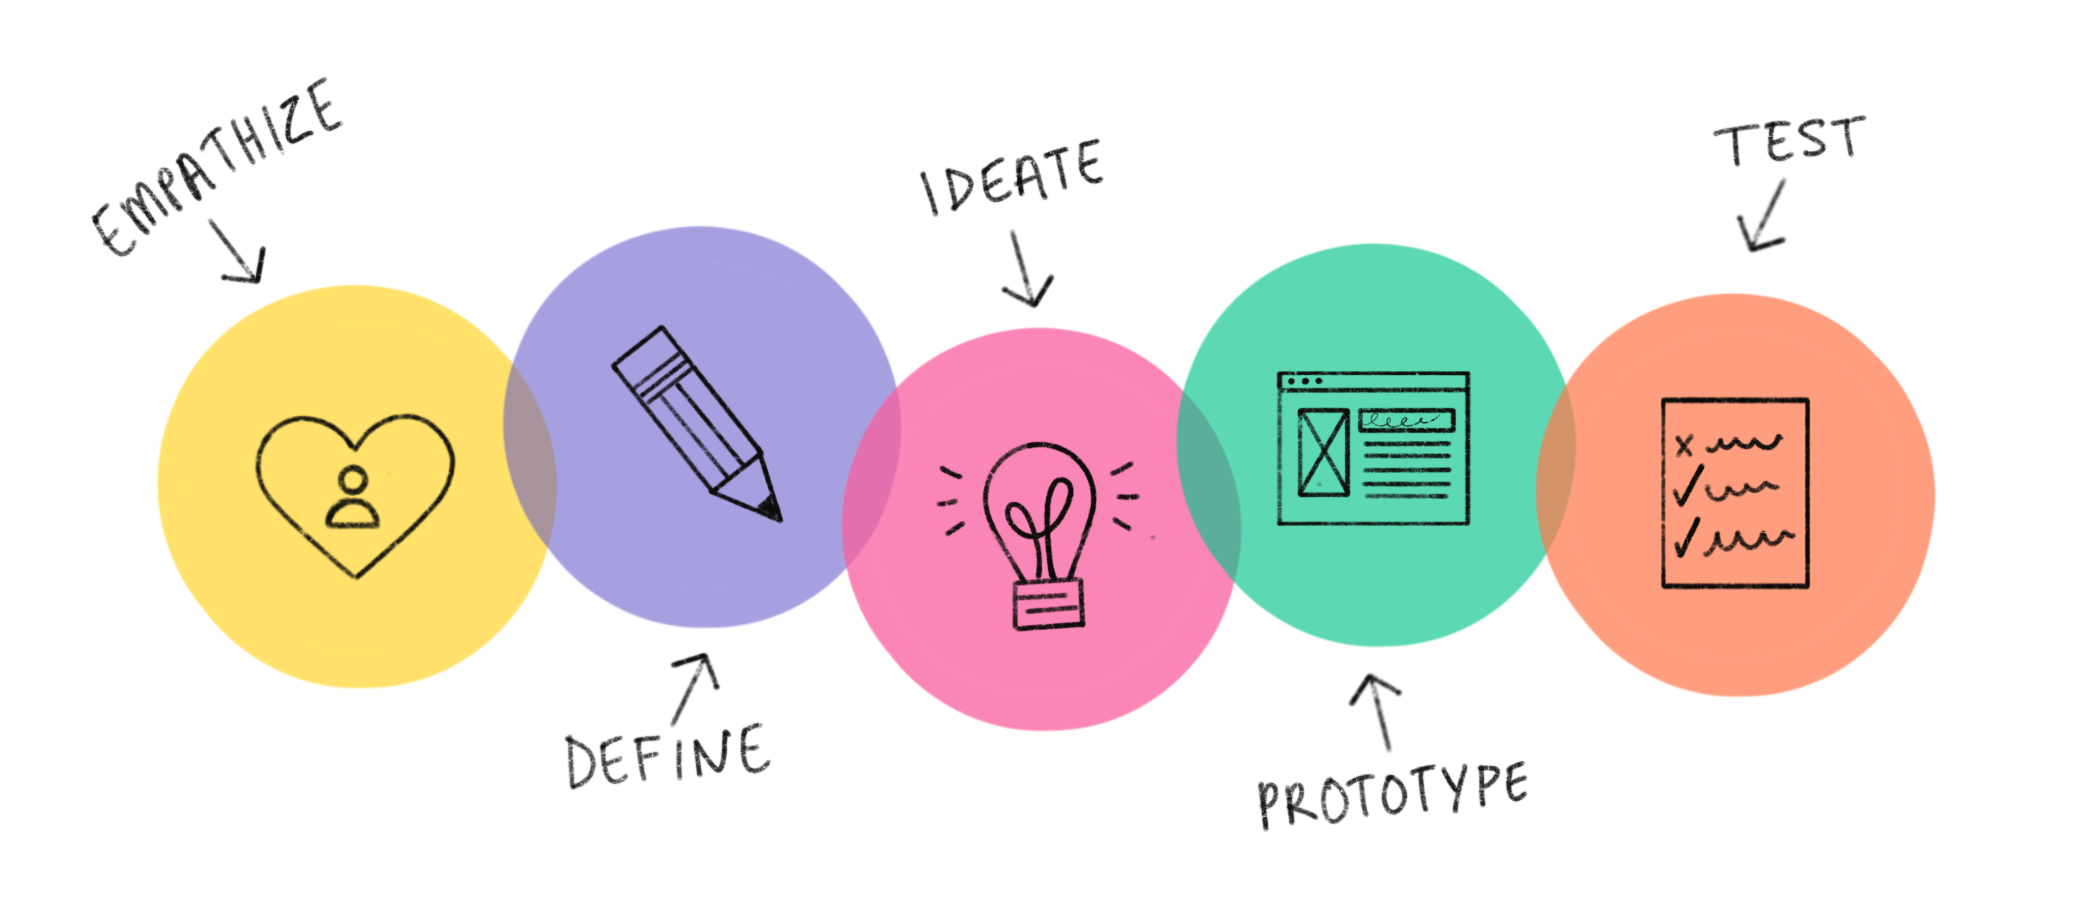 What is design thinking process?